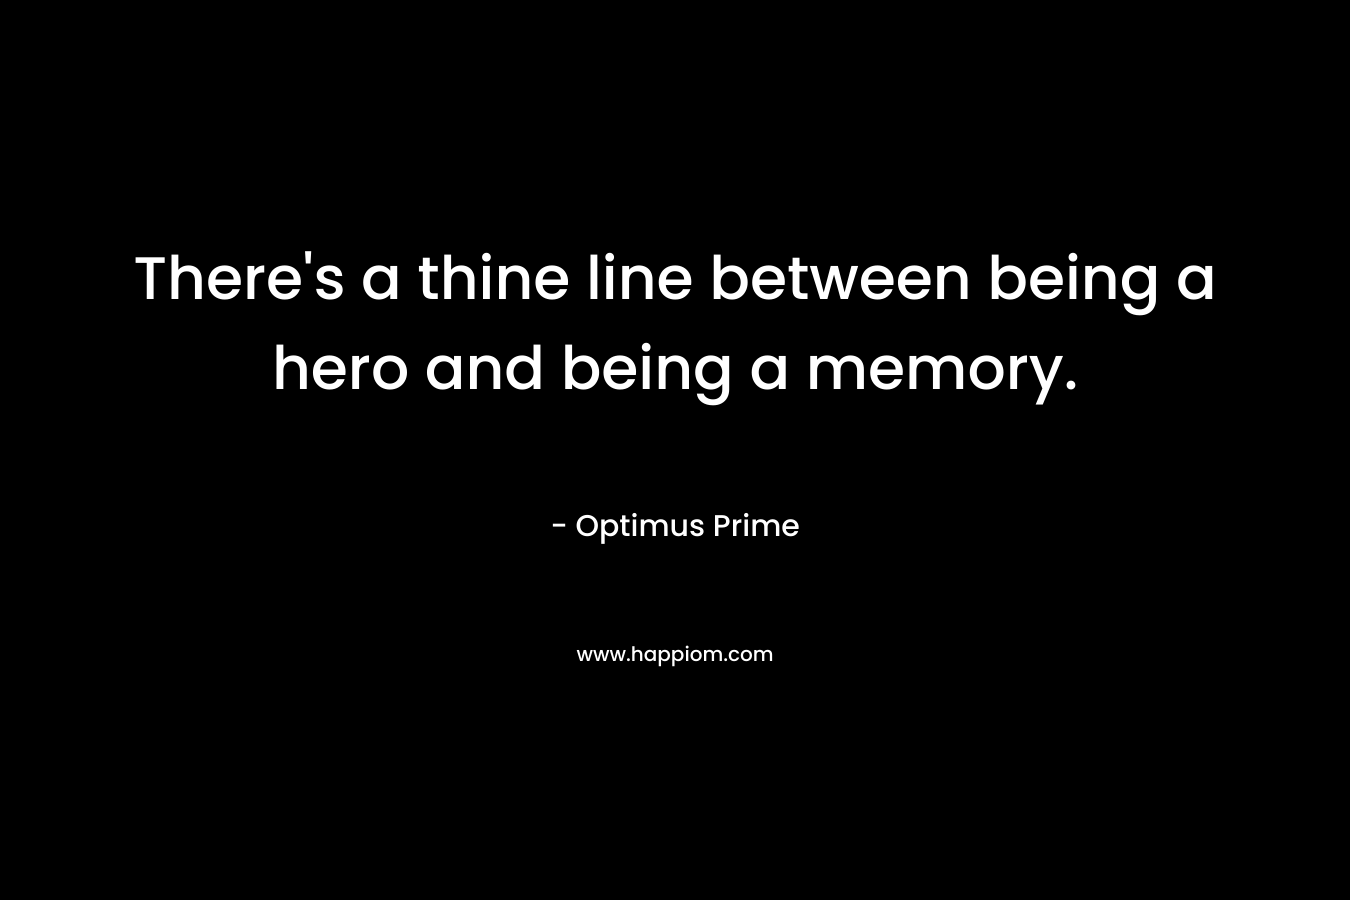 There's a thine line between being a hero and being a memory.